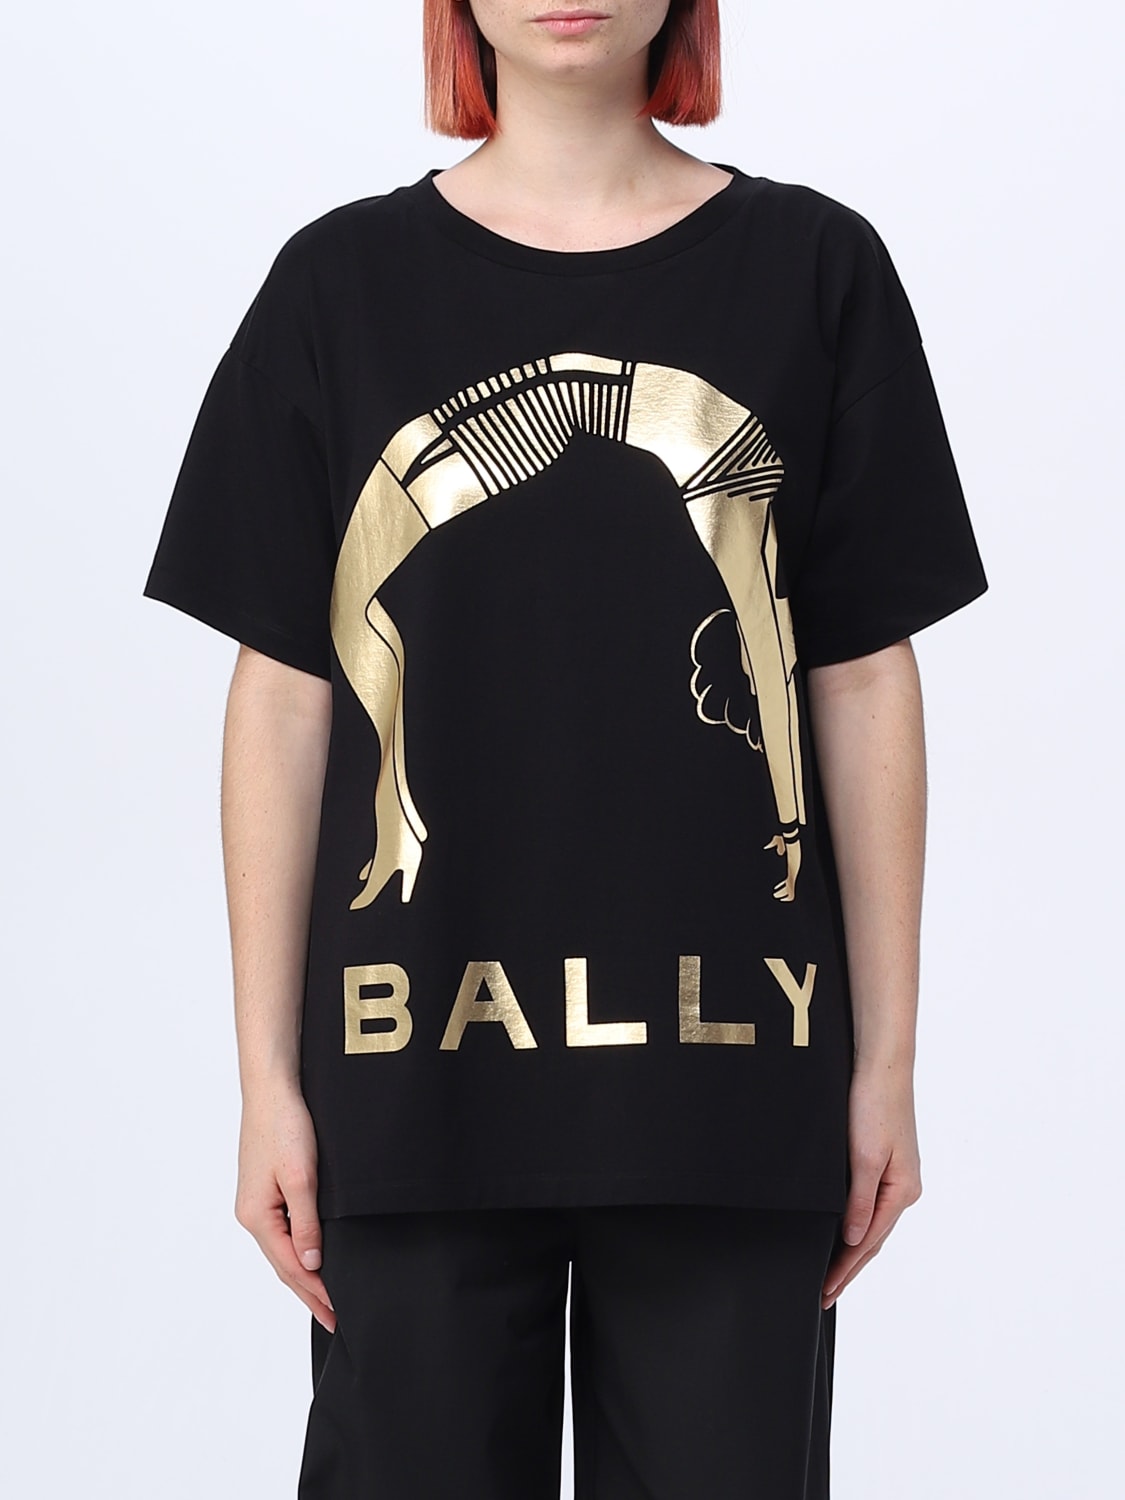 BALLY: t-shirt for woman - Black | Bally t-shirt MJE03ECO018 online at ...